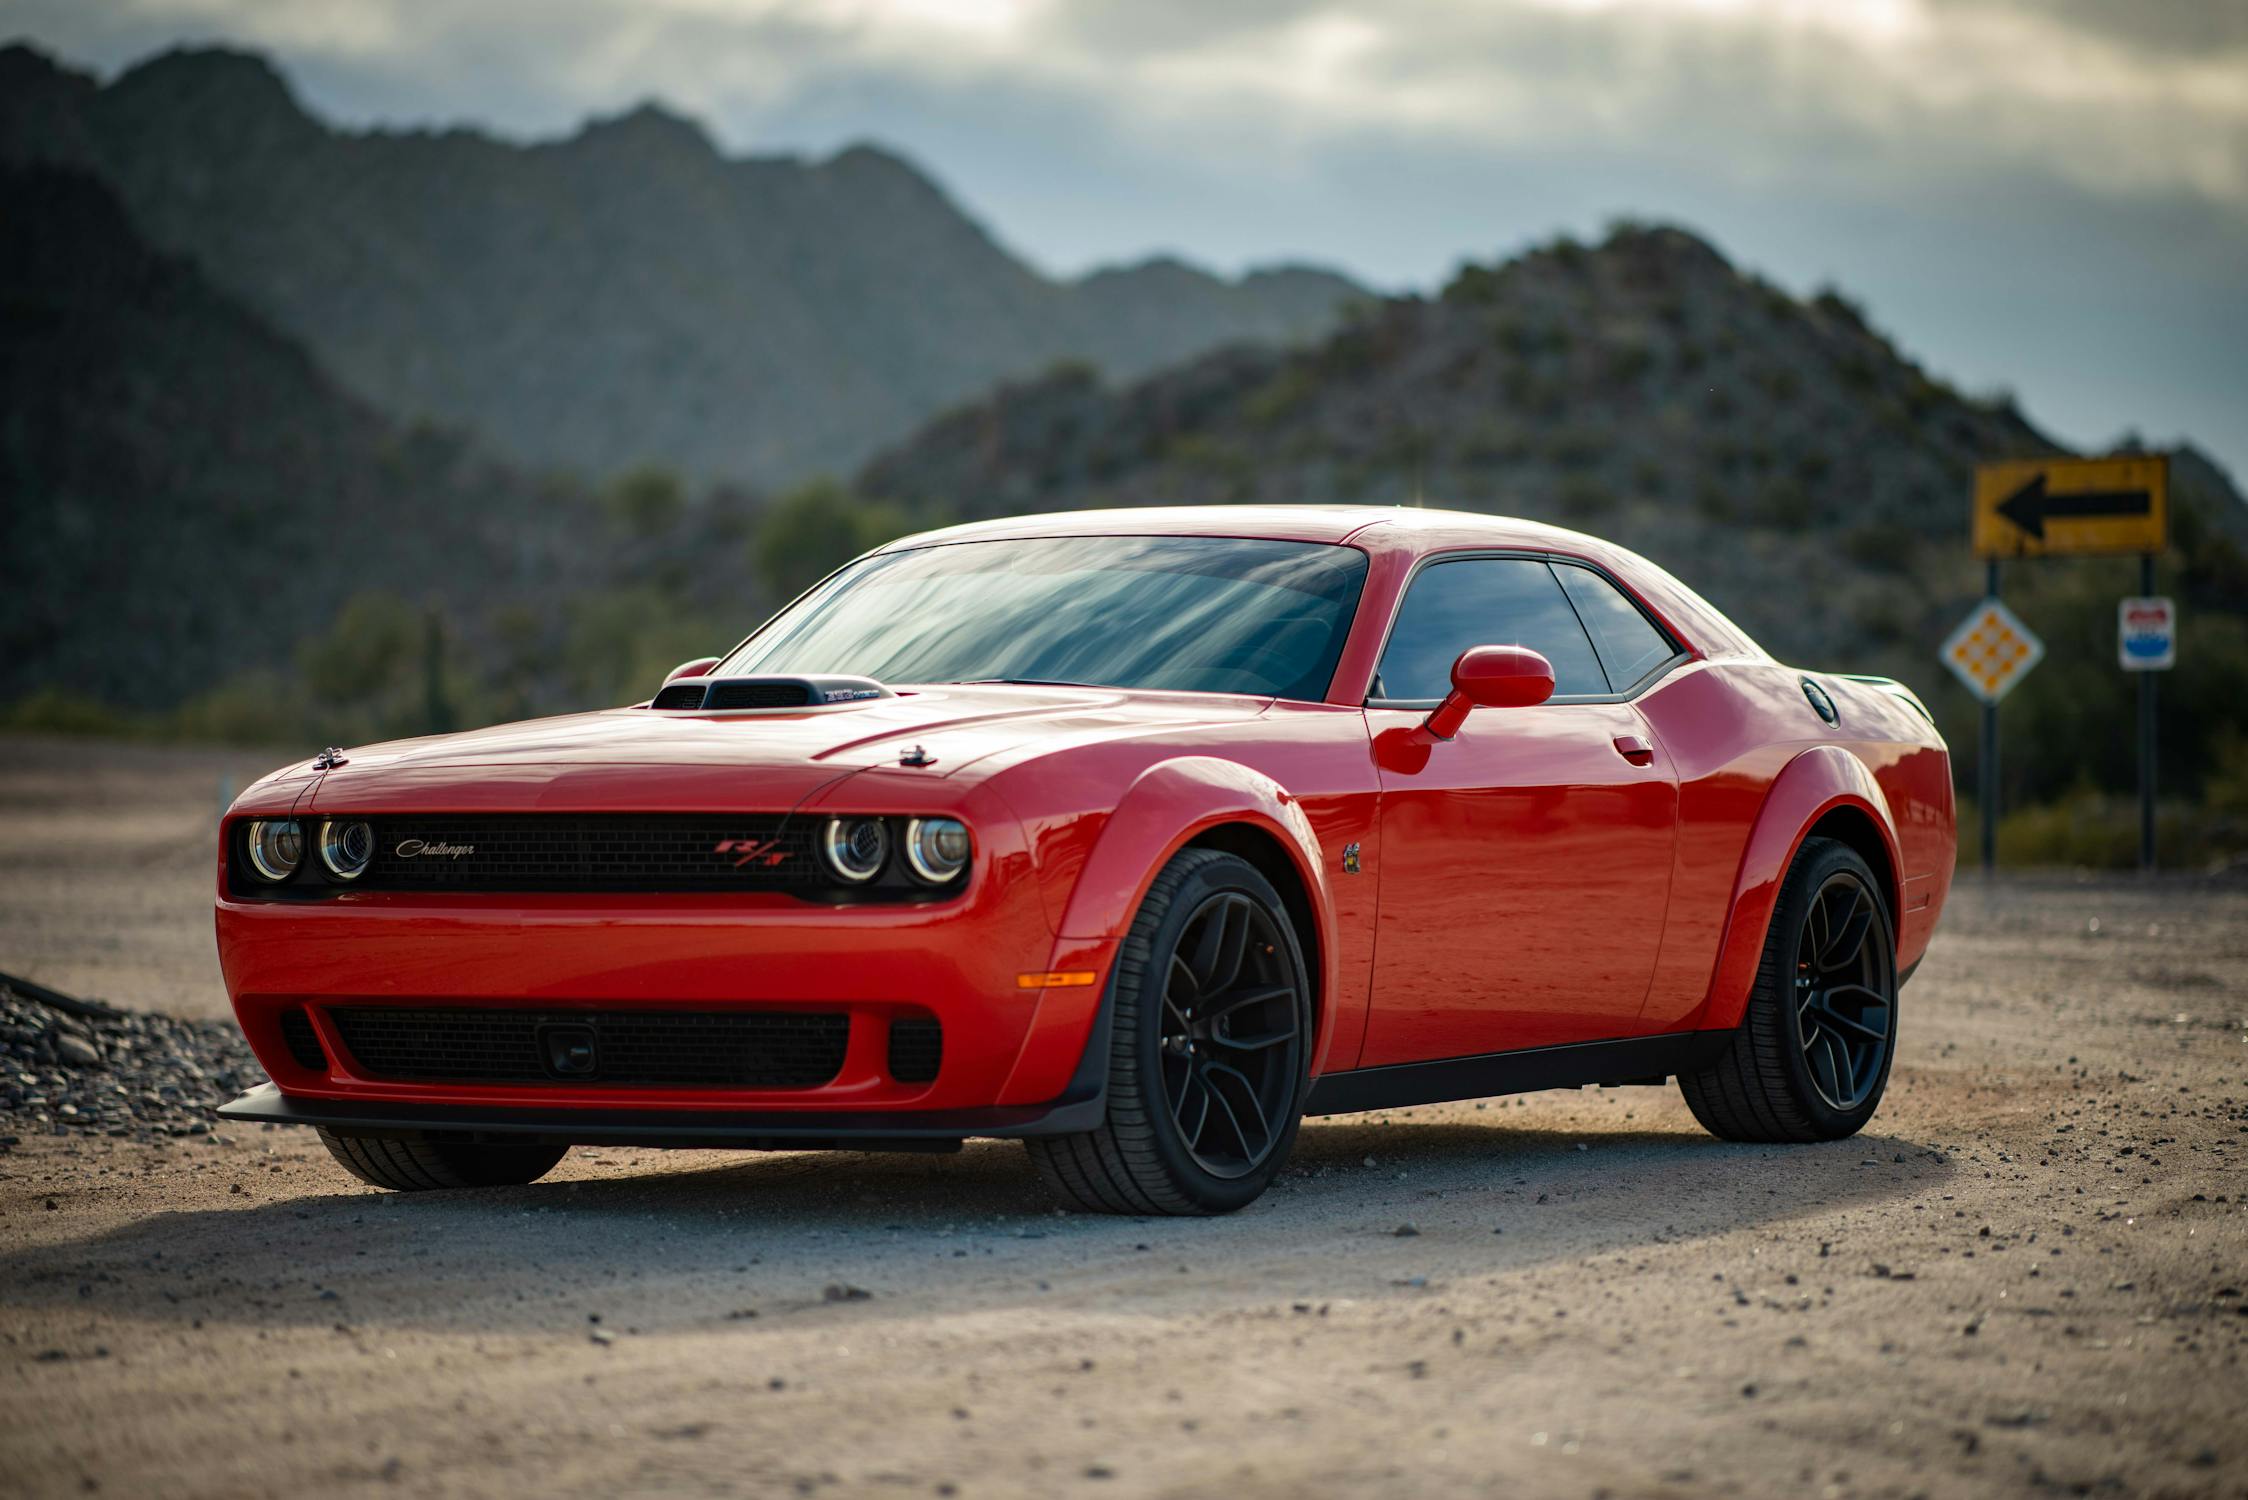 Final Dodge Challenger V8 muscle car steps forward with more than